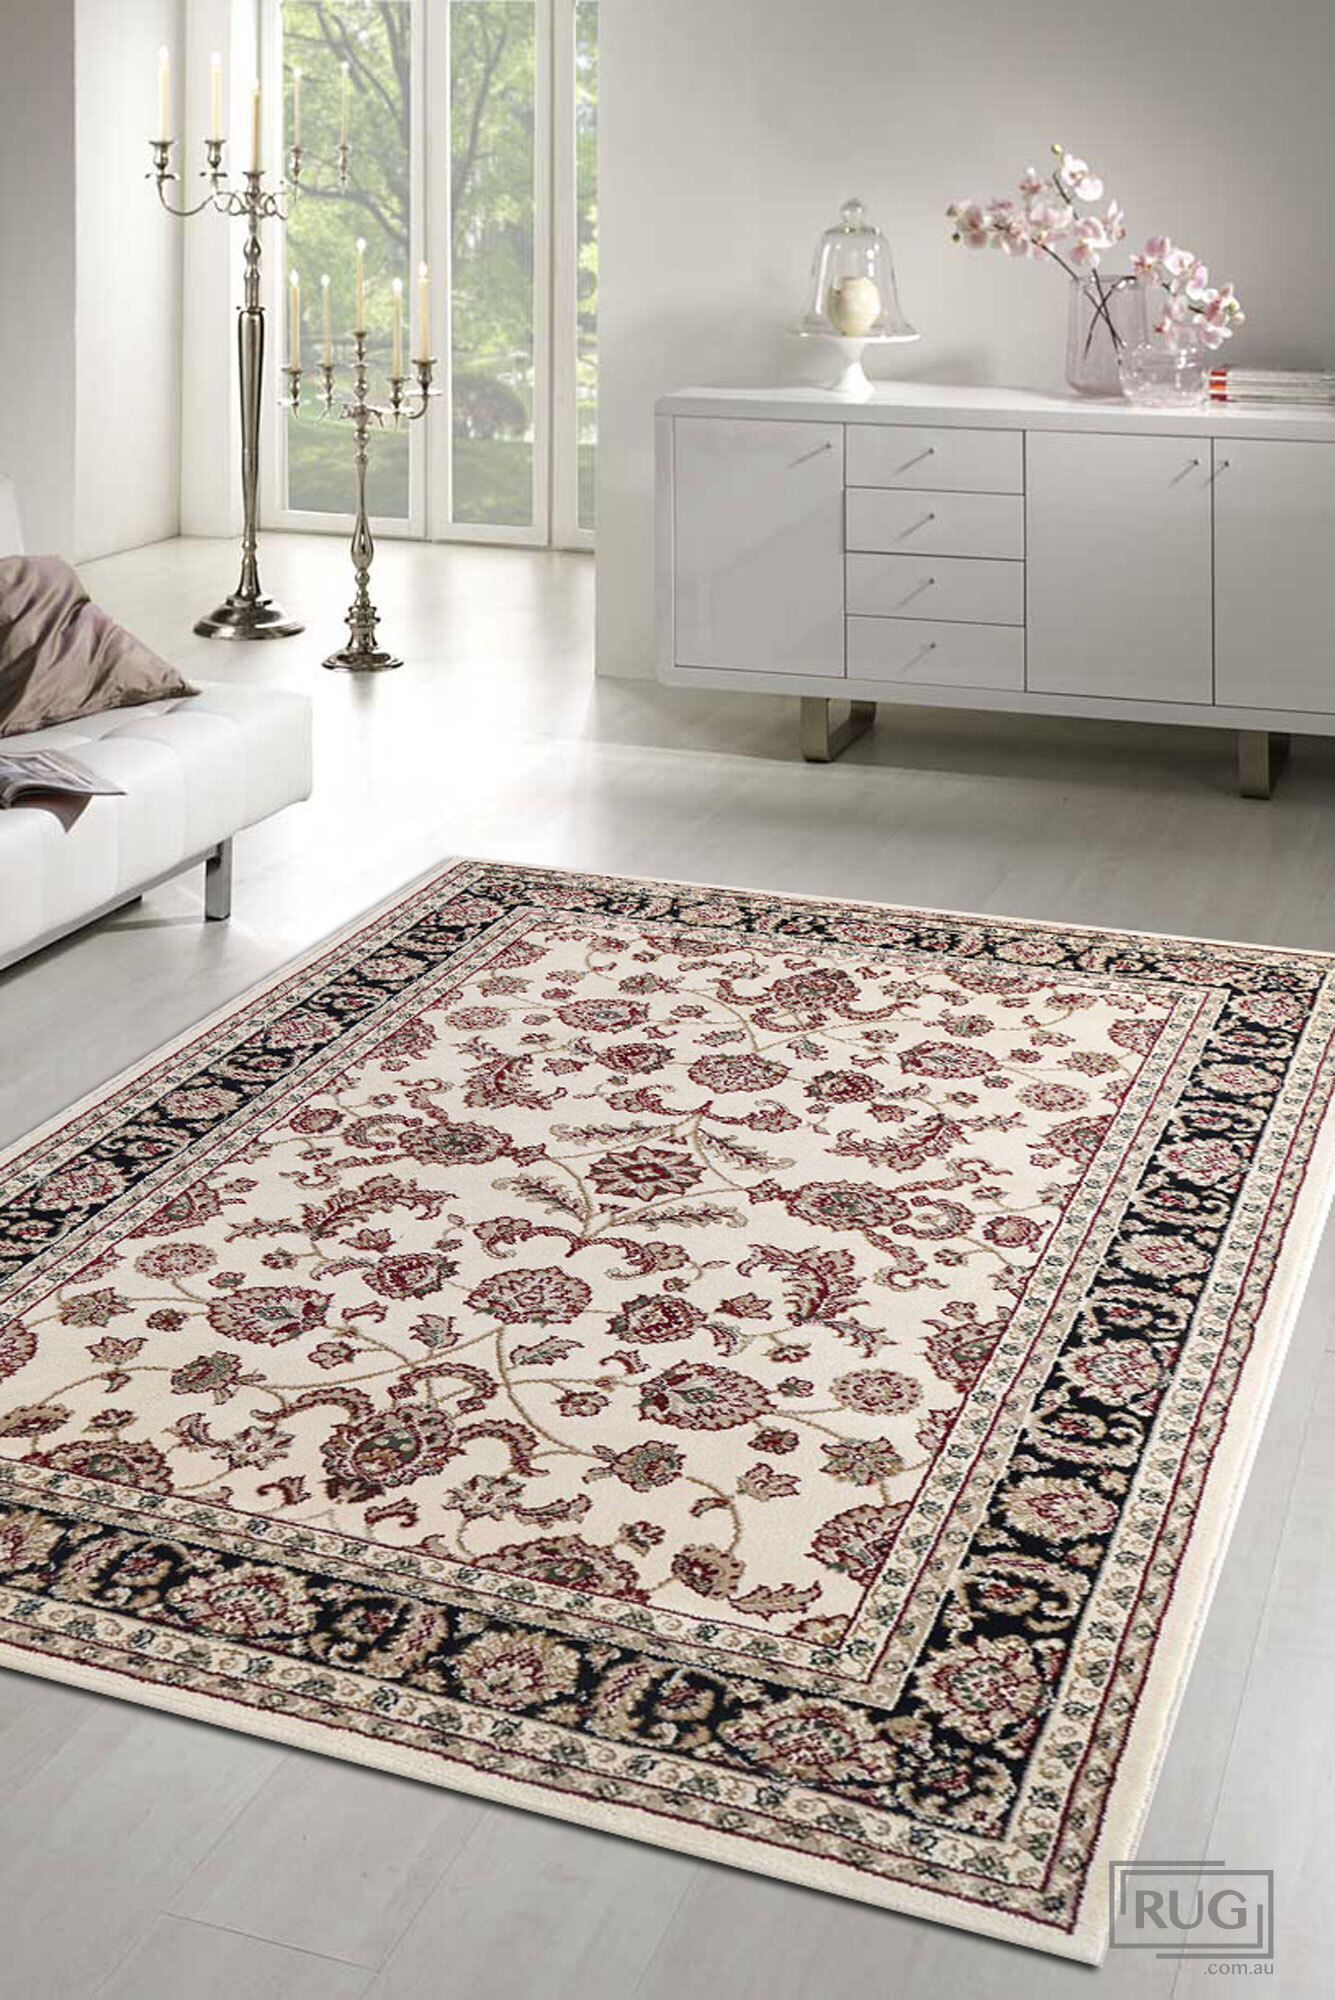 Justin Traditional Ornate Rug(Size 170 x 120cm)